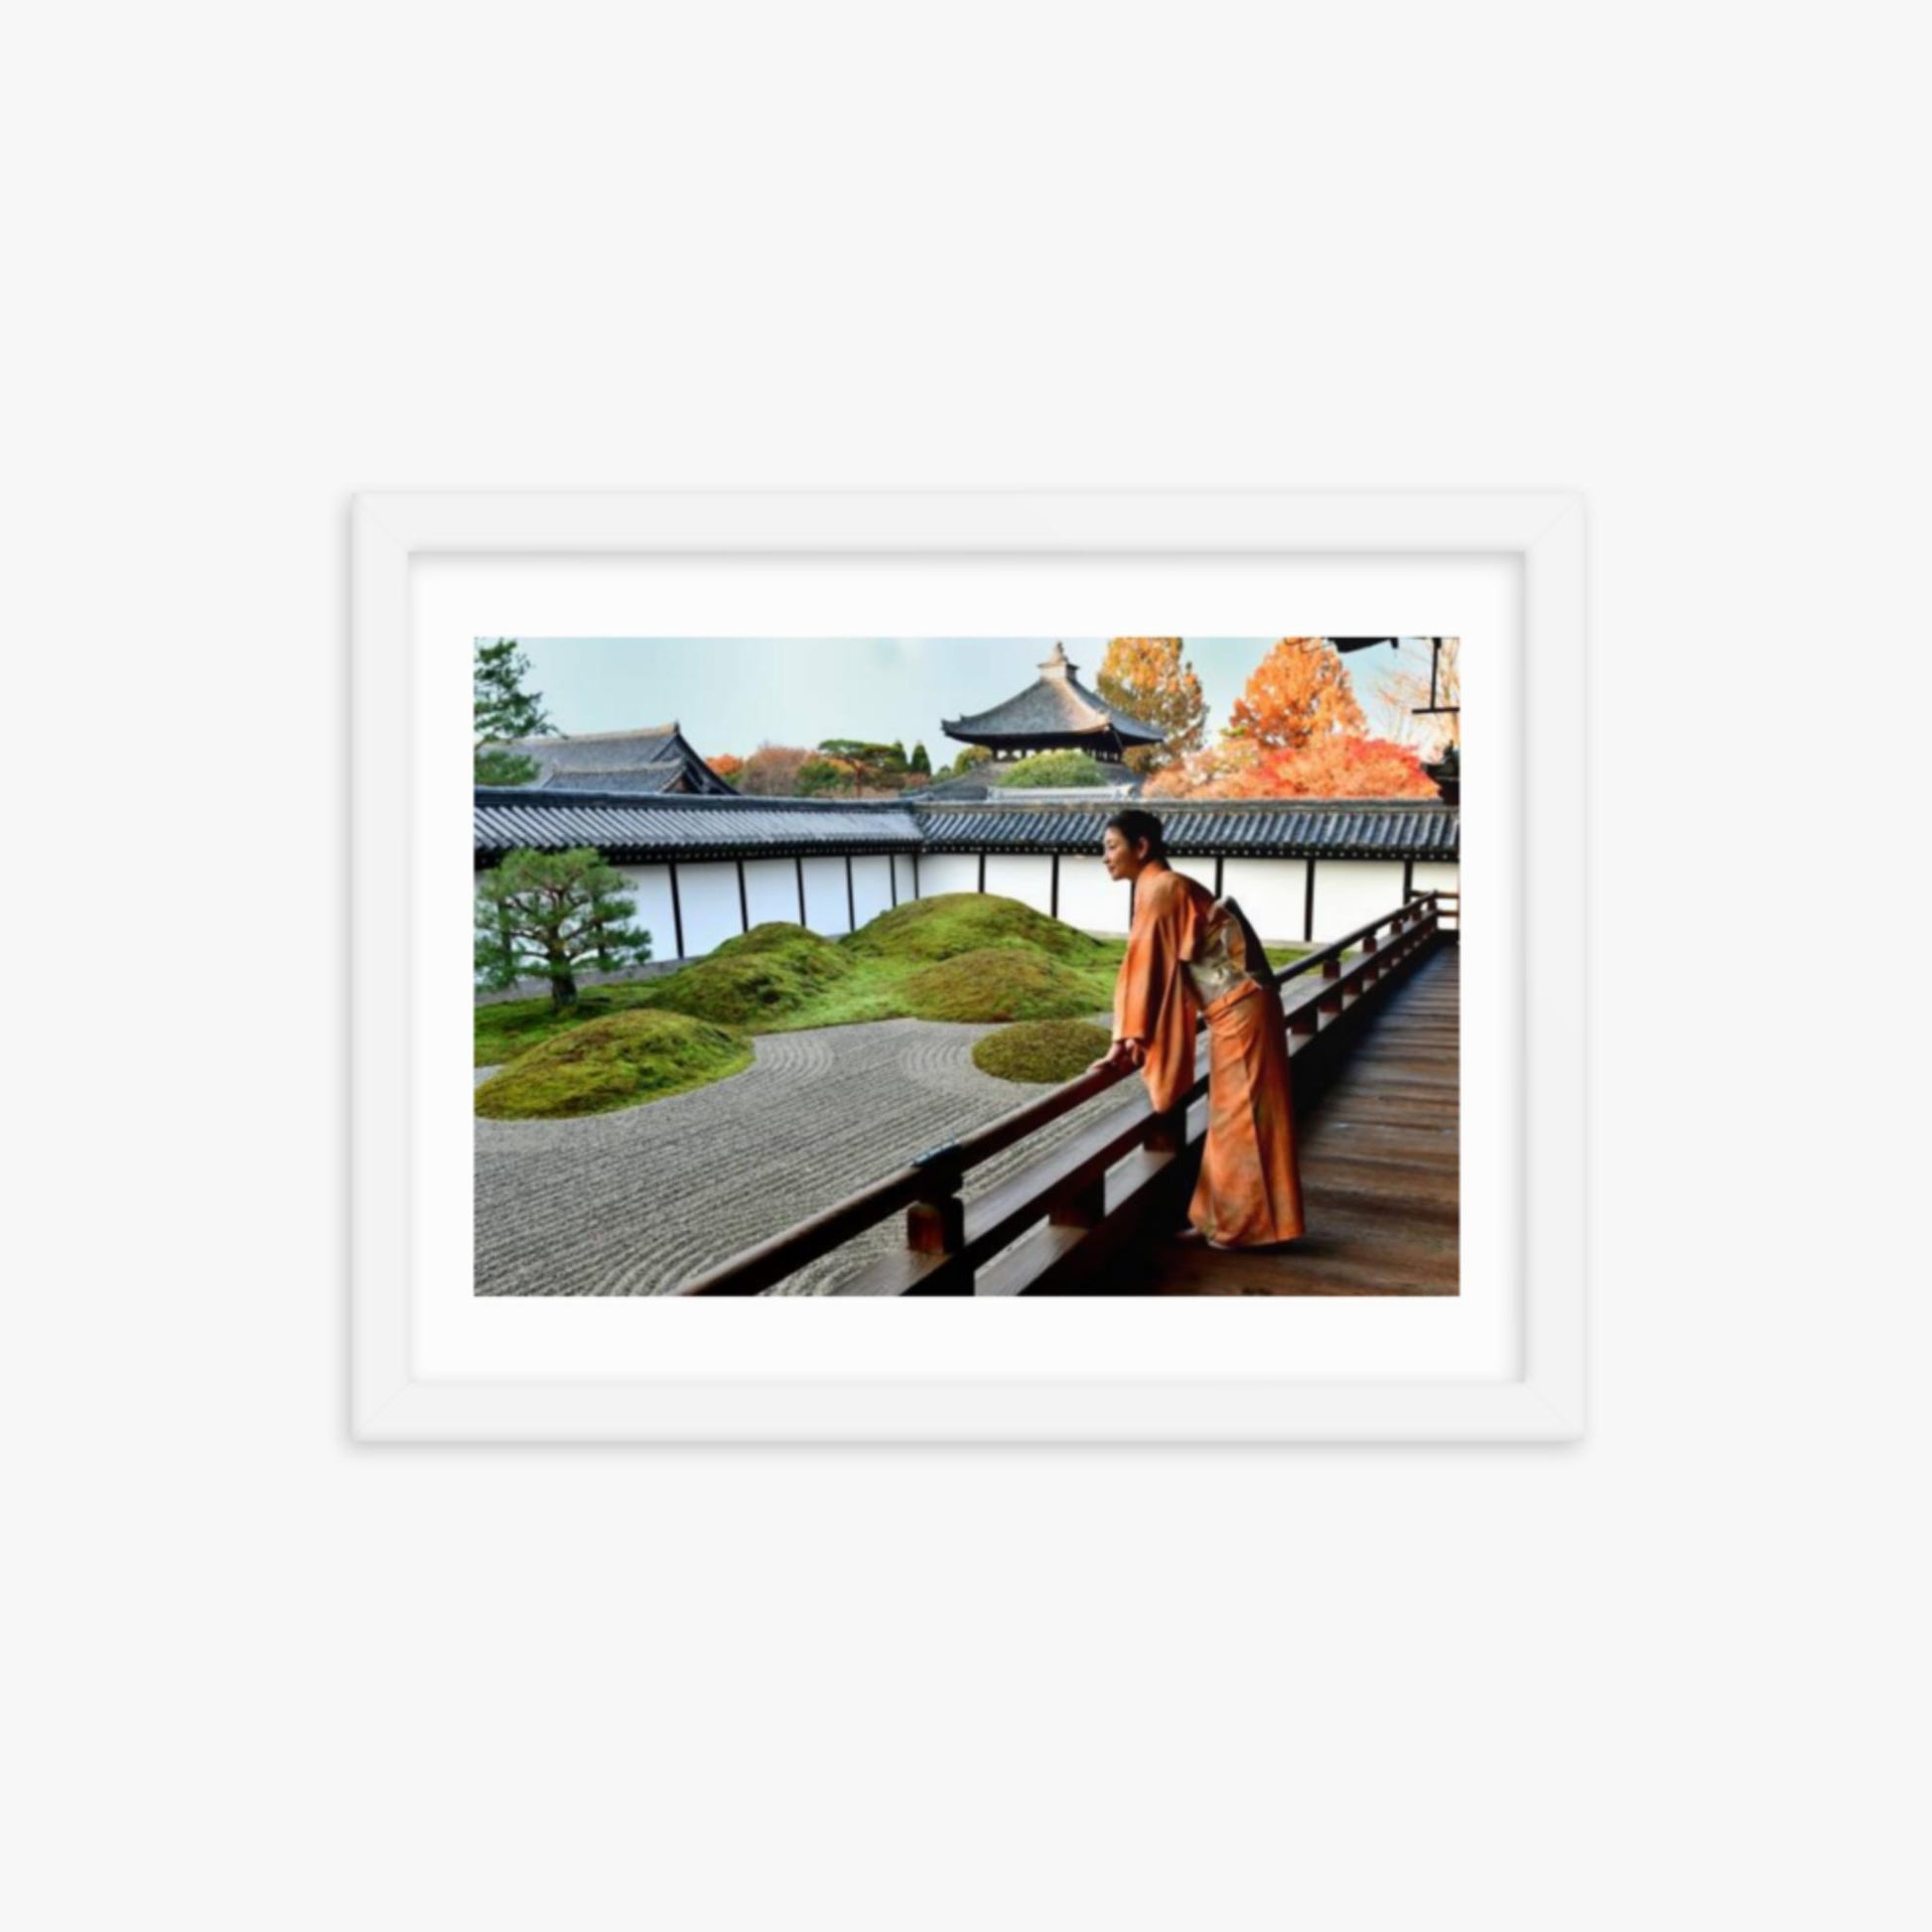 Japanese Woman in Kimono Appreciating Japanese Garden at Tofukuji, Kyoto 12x16 in Poster With White Frame